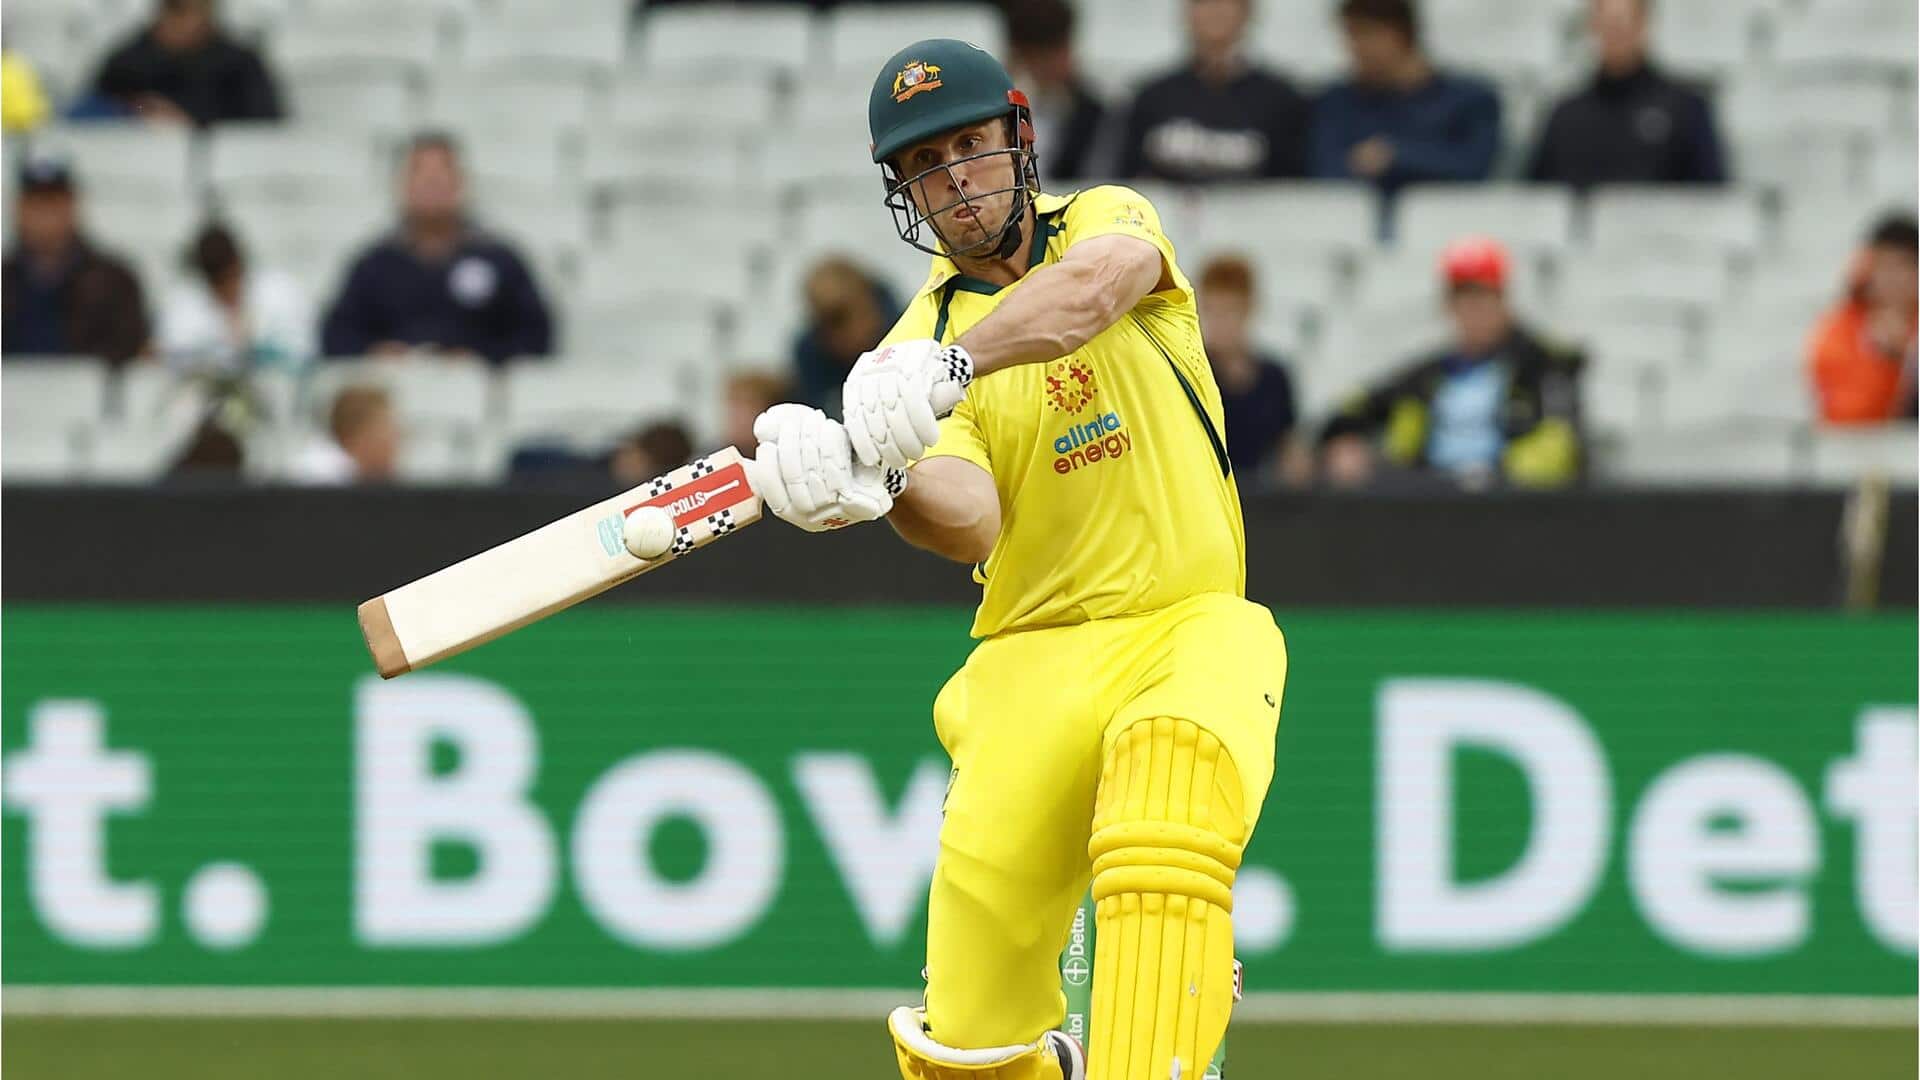 SA vs AUS 2nd T20I: Preview, stats, and Dream11 prediction